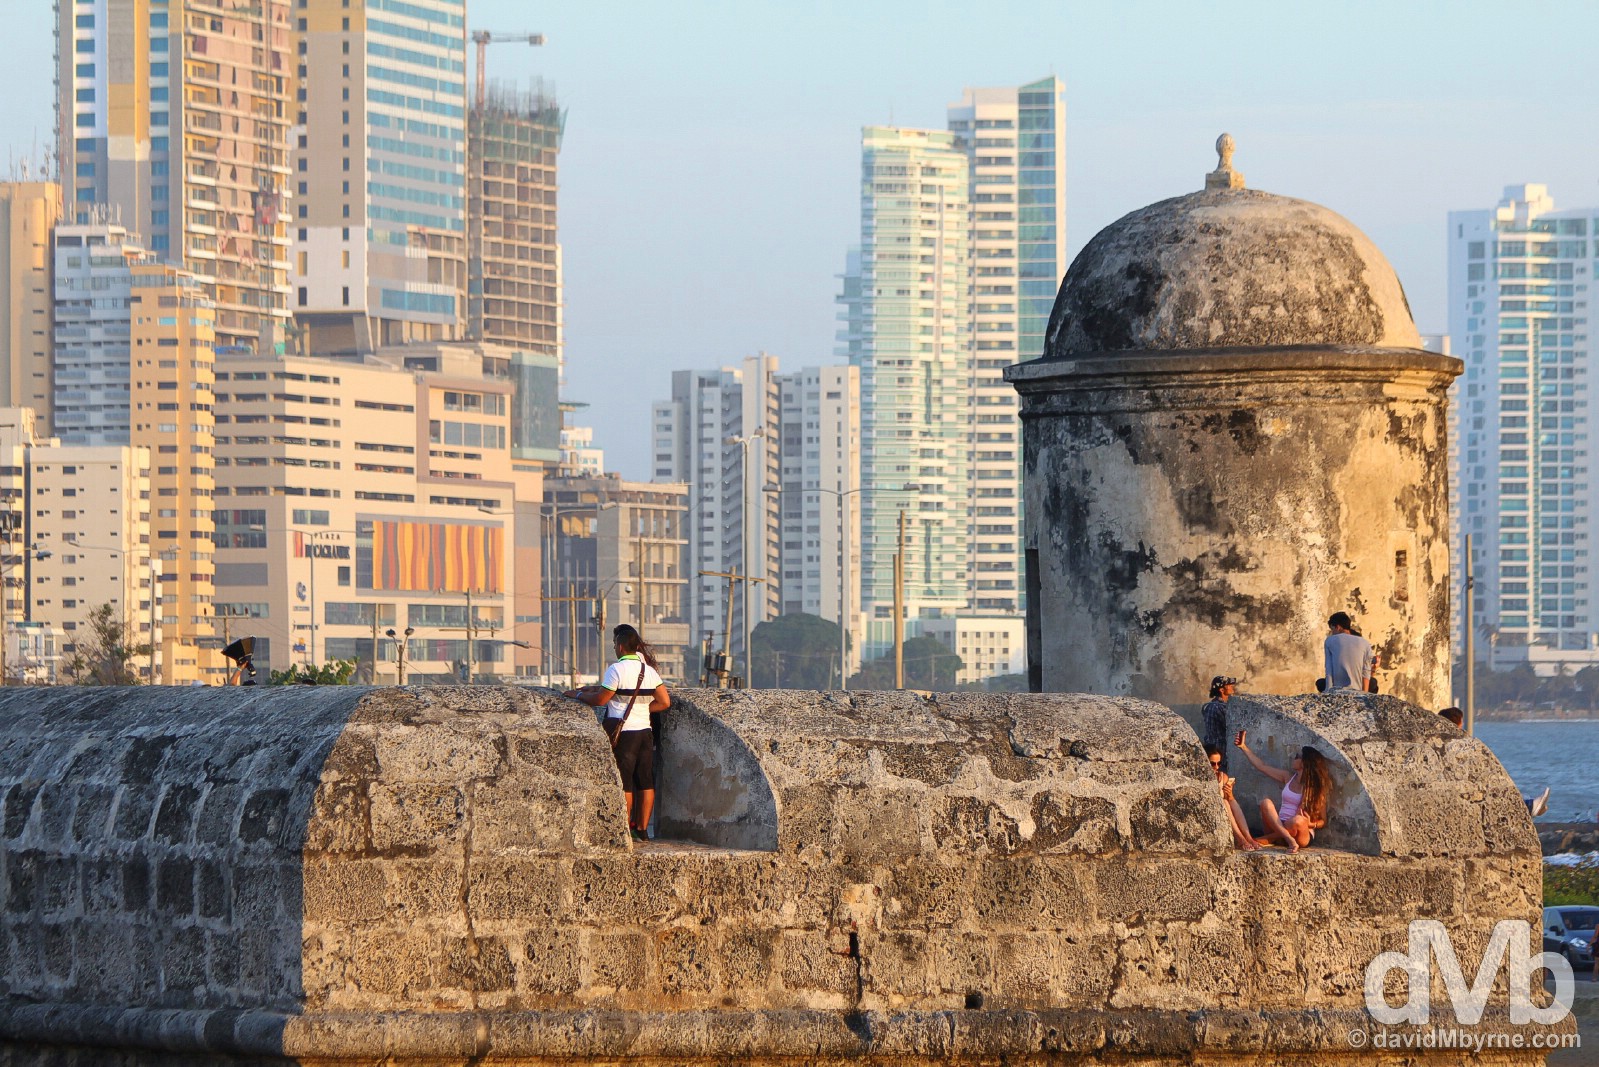 New & old. New Cartagena as seen from a section of Las Murallas, the Old Town walls. Cartagena, Colombia. June 24, 2015.